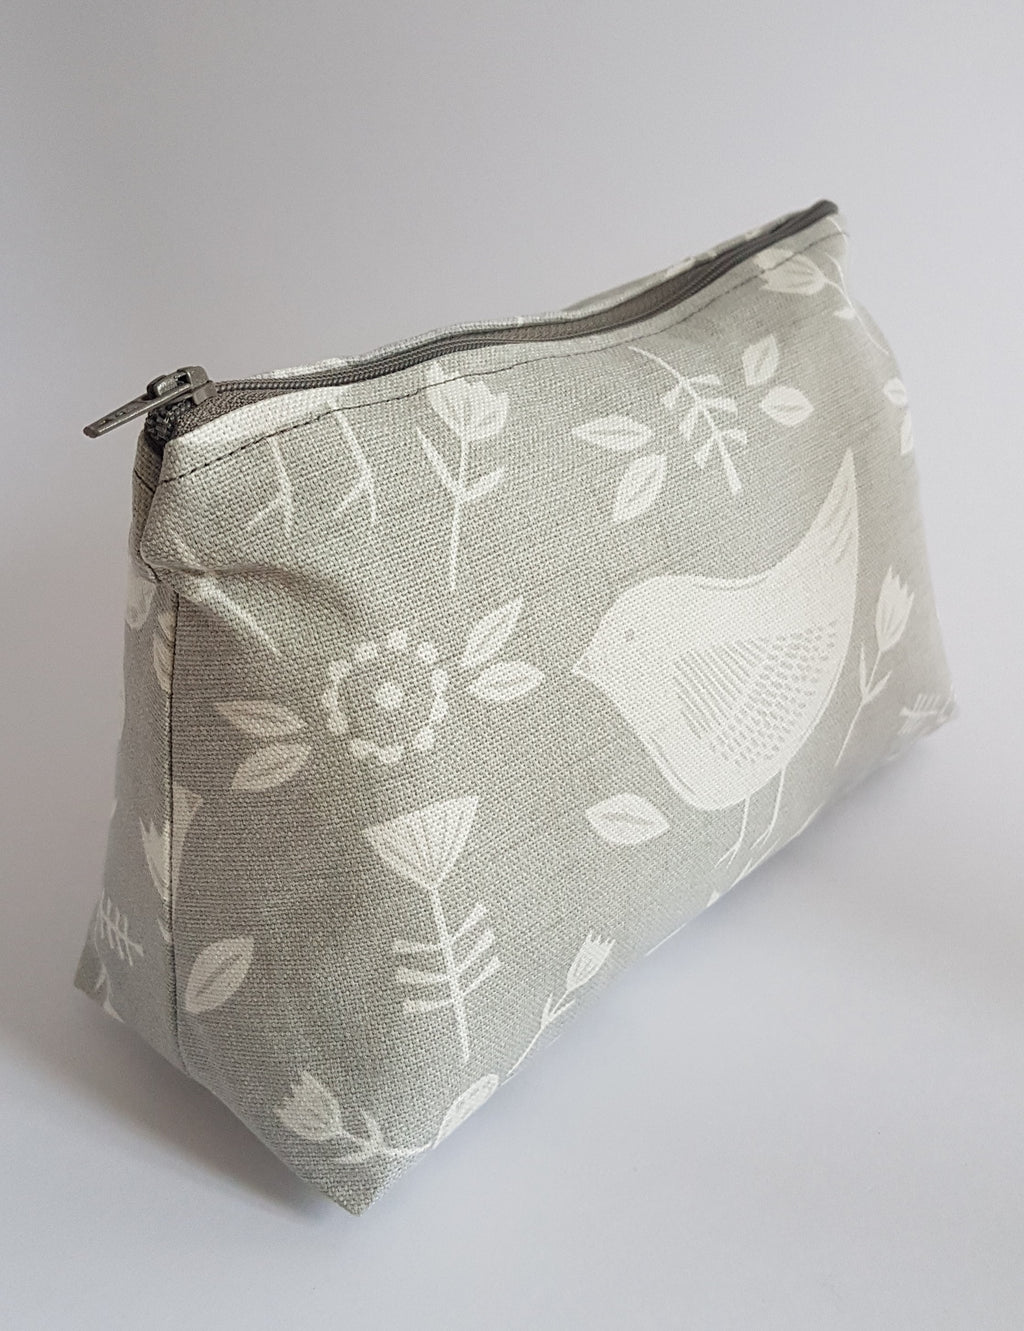 Make-up Bag/ Pouch in a grey bird fabric